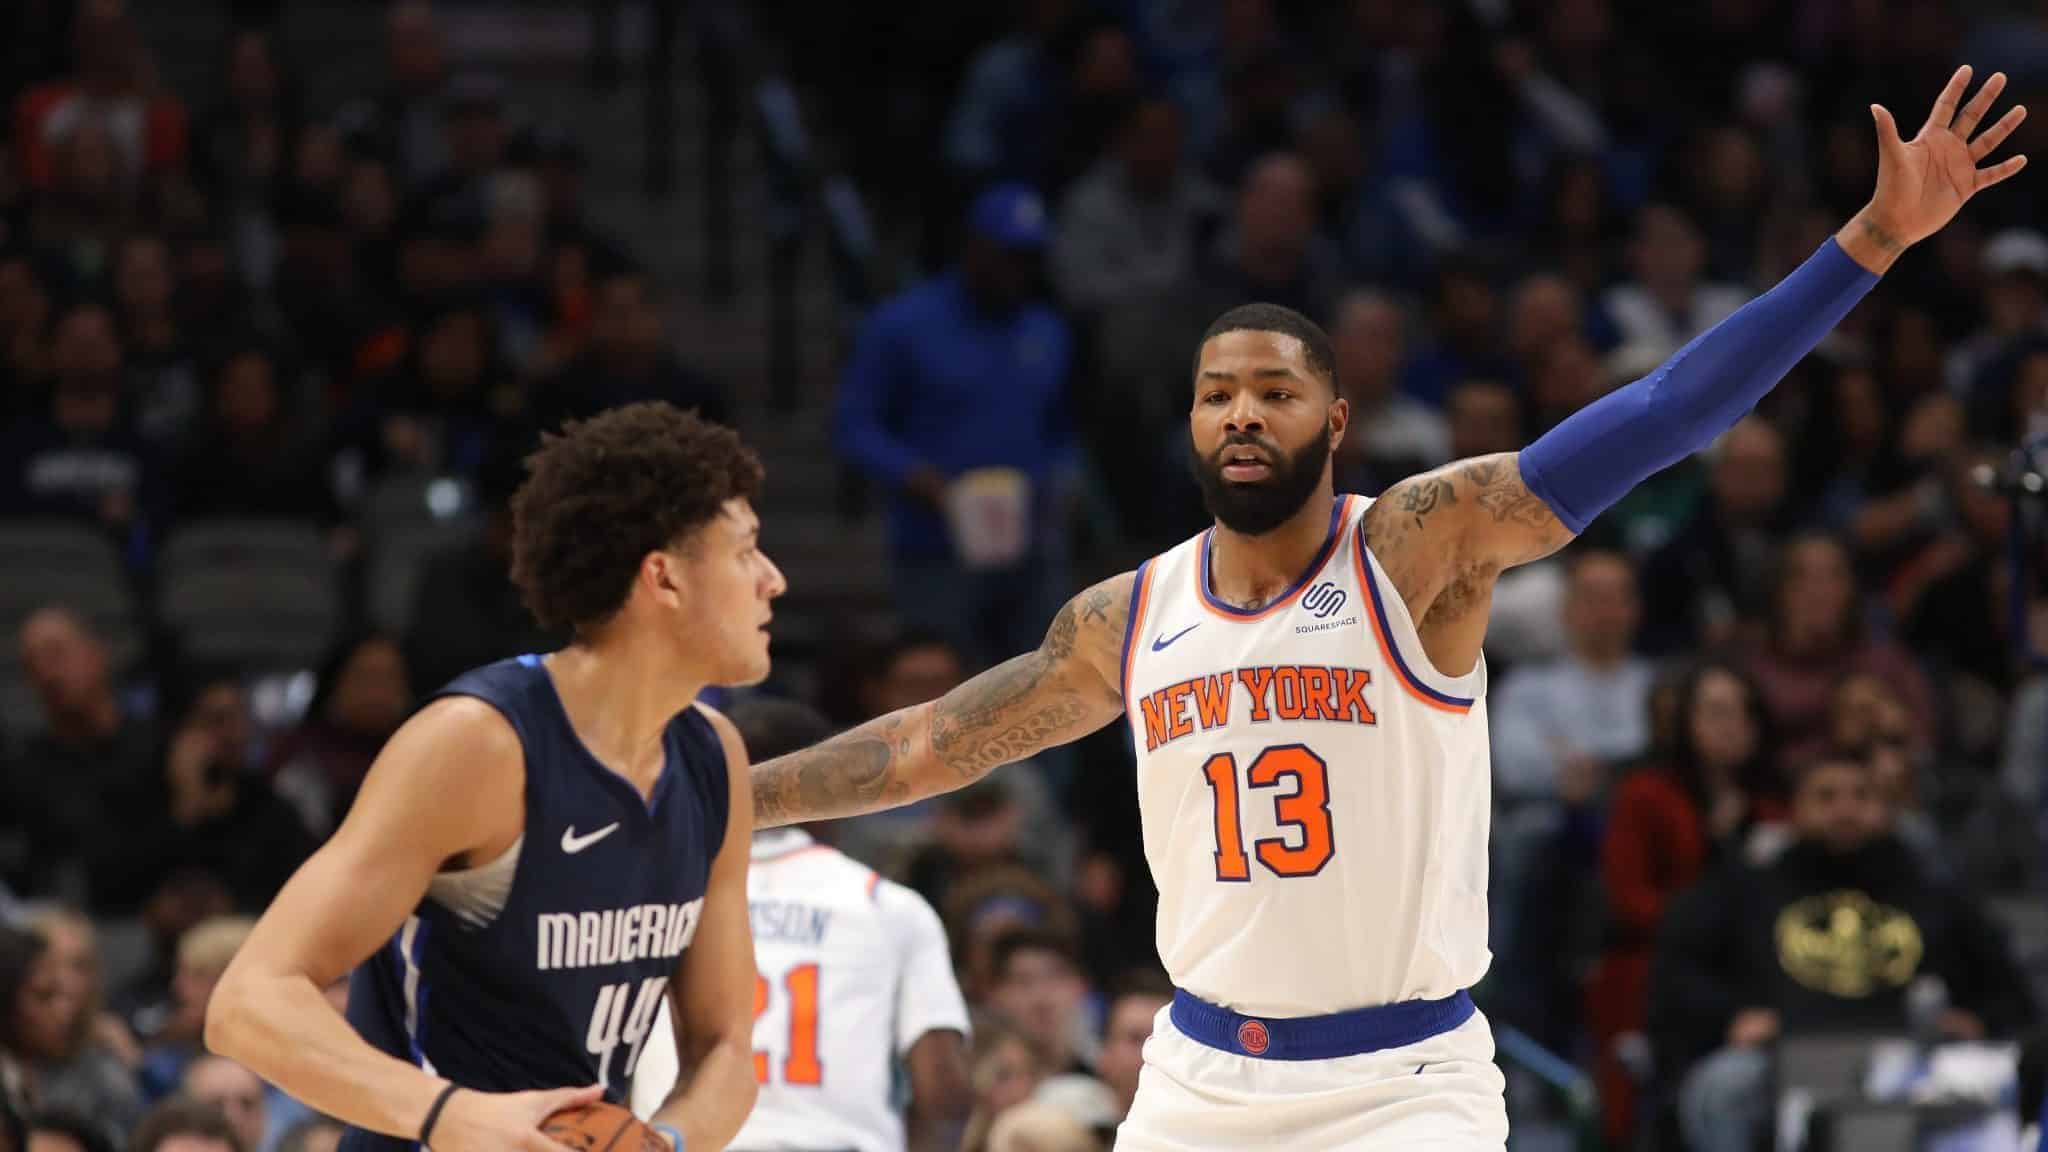 DALLAS, TEXAS - NOVEMBER 08: Marcus Morris Sr. #13 of the New York Knicks at American Airlines Center on November 08, 2019 in Dallas, Texas.